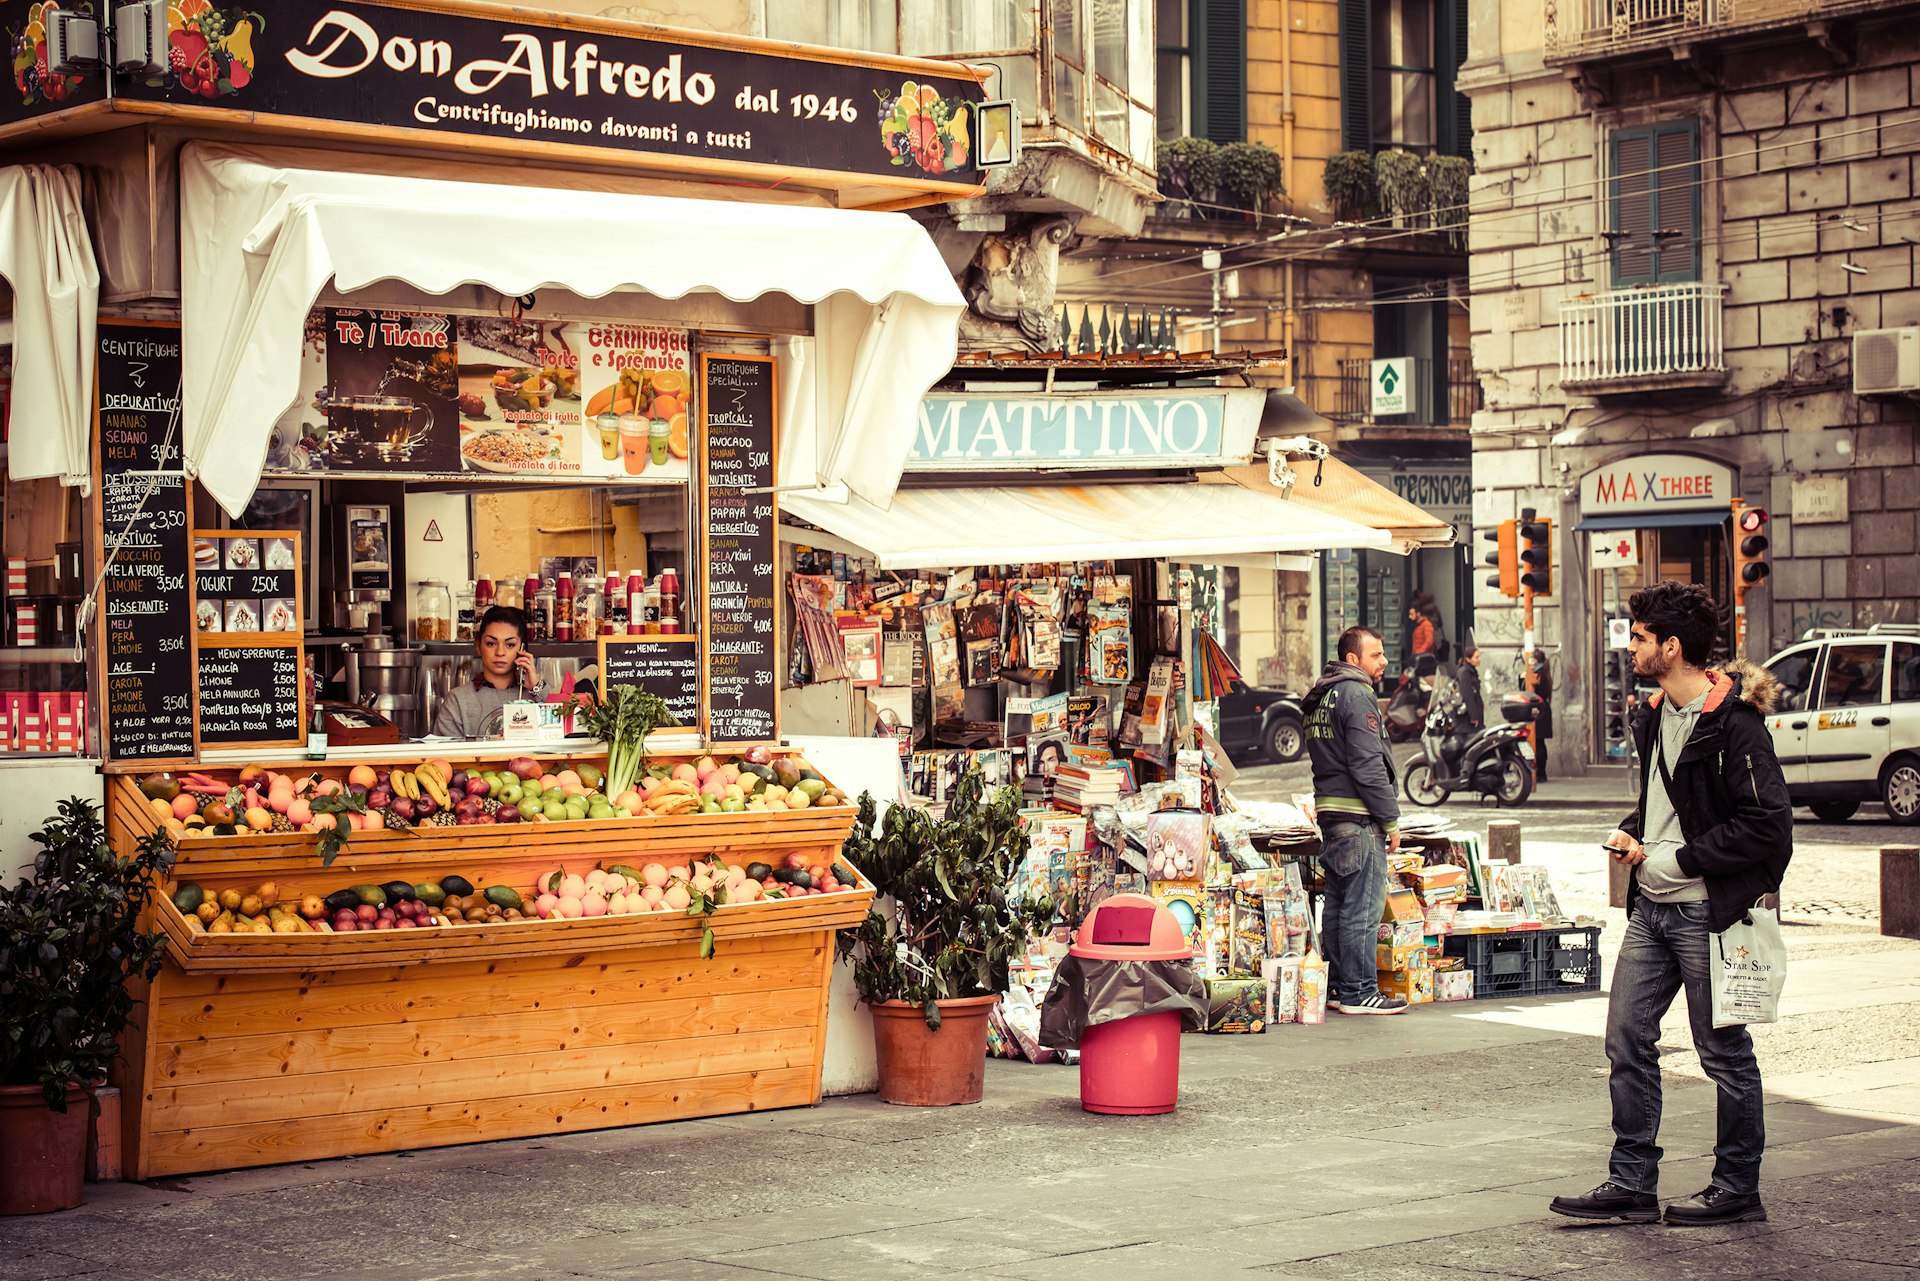 A man stands looking at a small fast food cafe and shop in the historical center of Naples, Italy